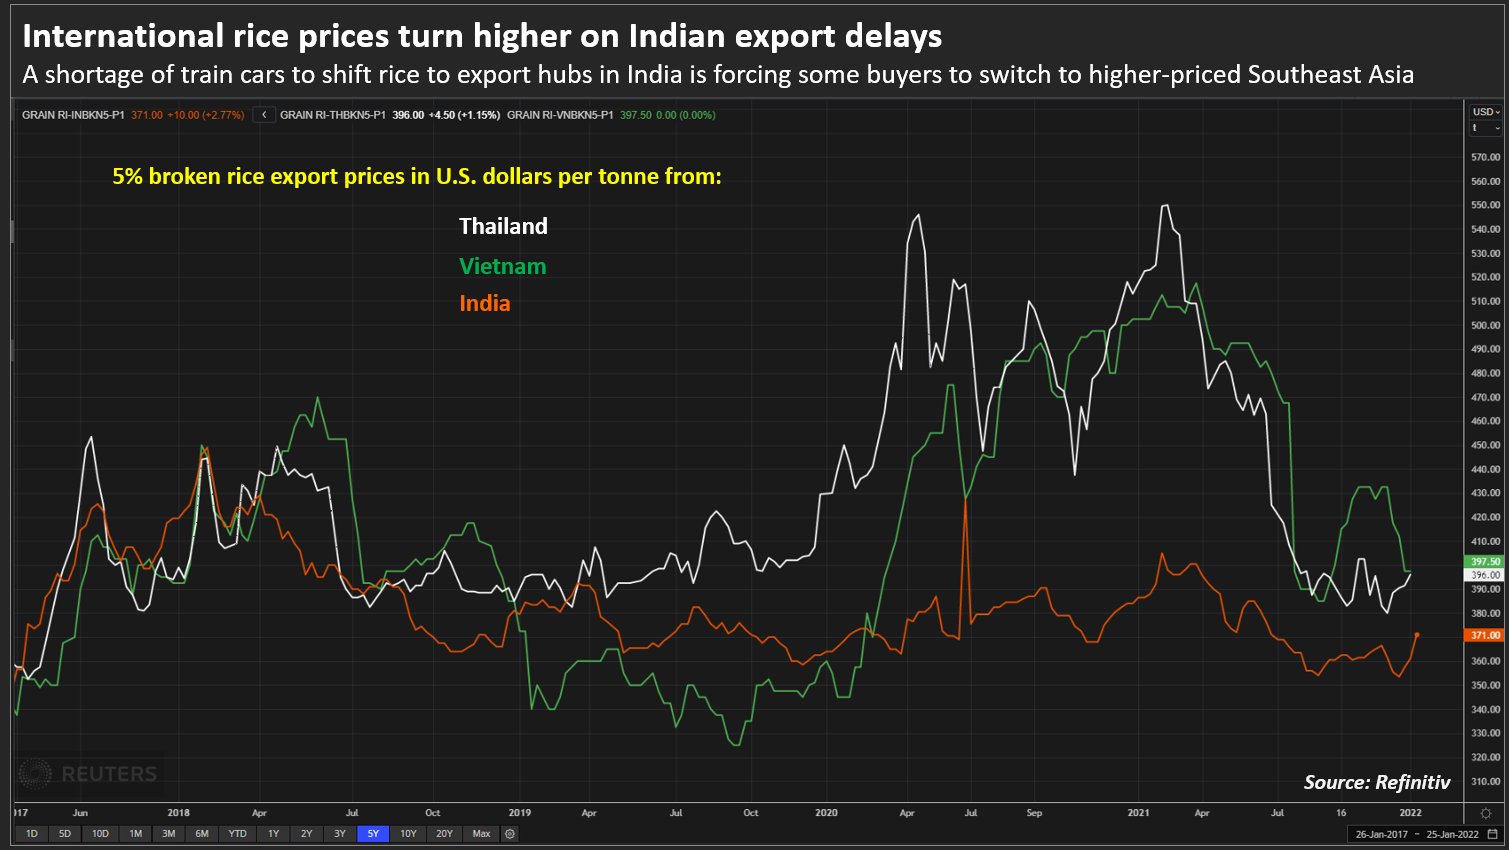 International rice prices turn higher on Indian export delays